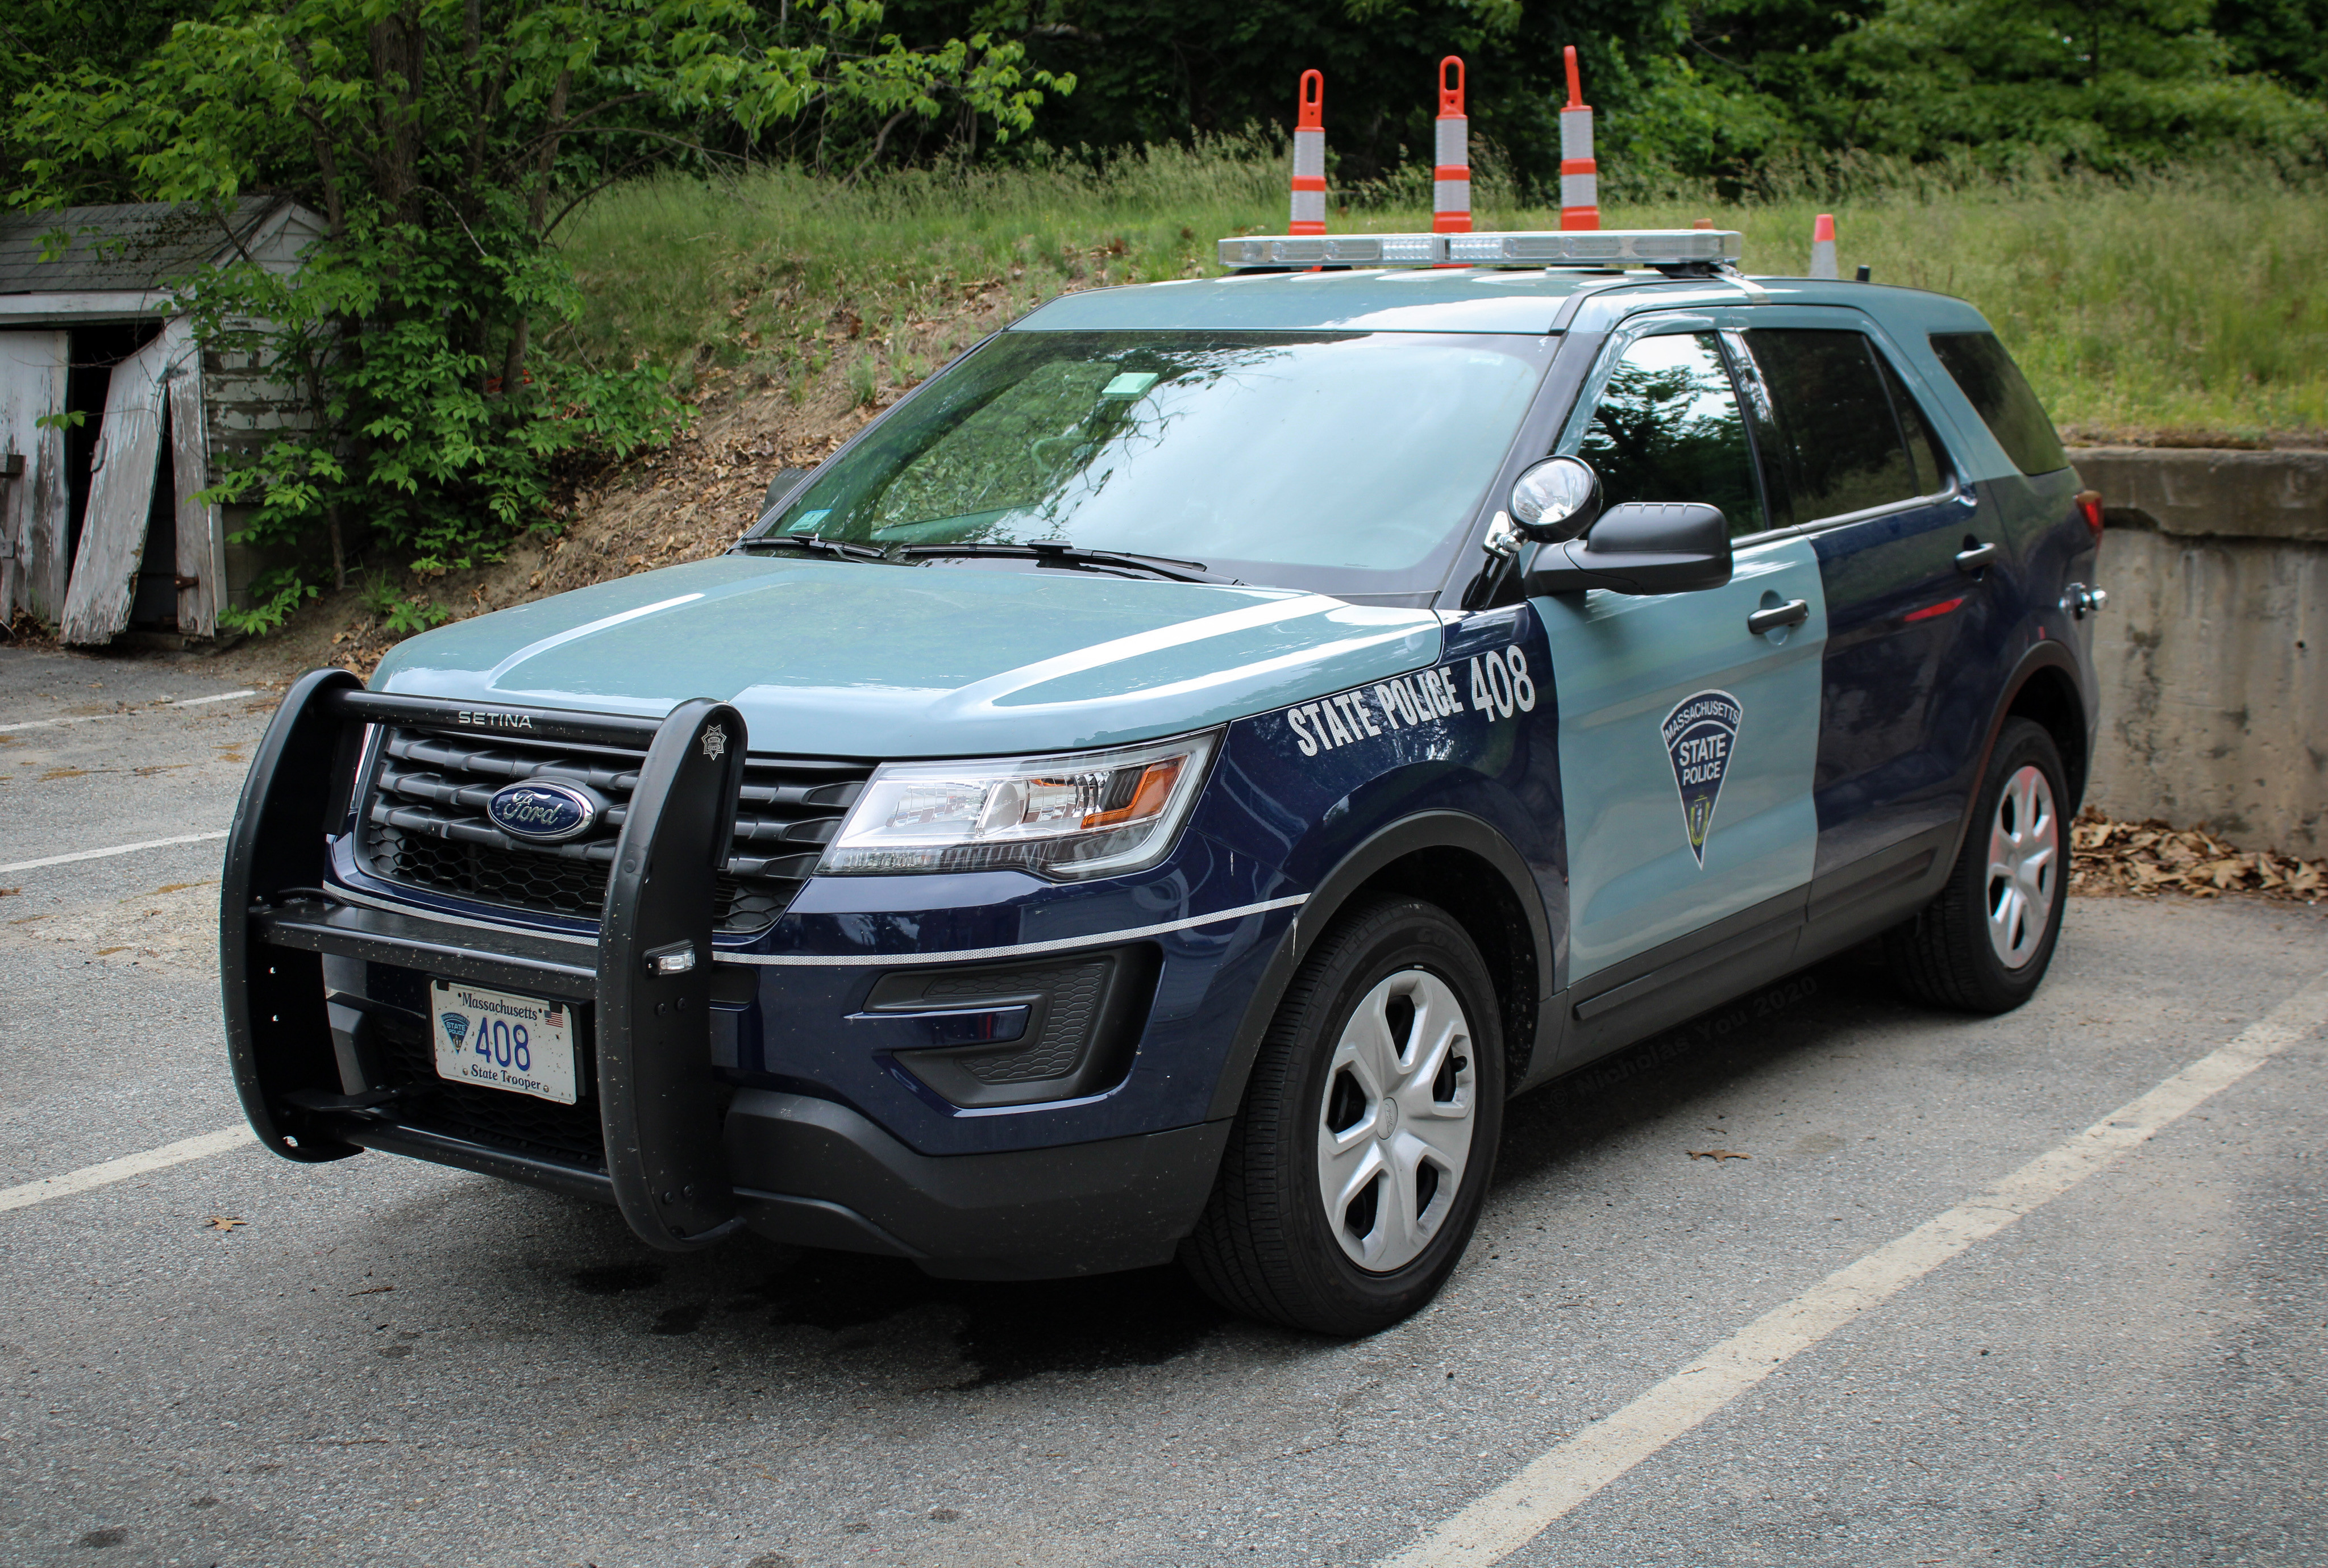 A photo  of Massachusetts State Police
            Cruiser 408, a 2018-2019 Ford Police Interceptor Utility             taken by Nicholas You